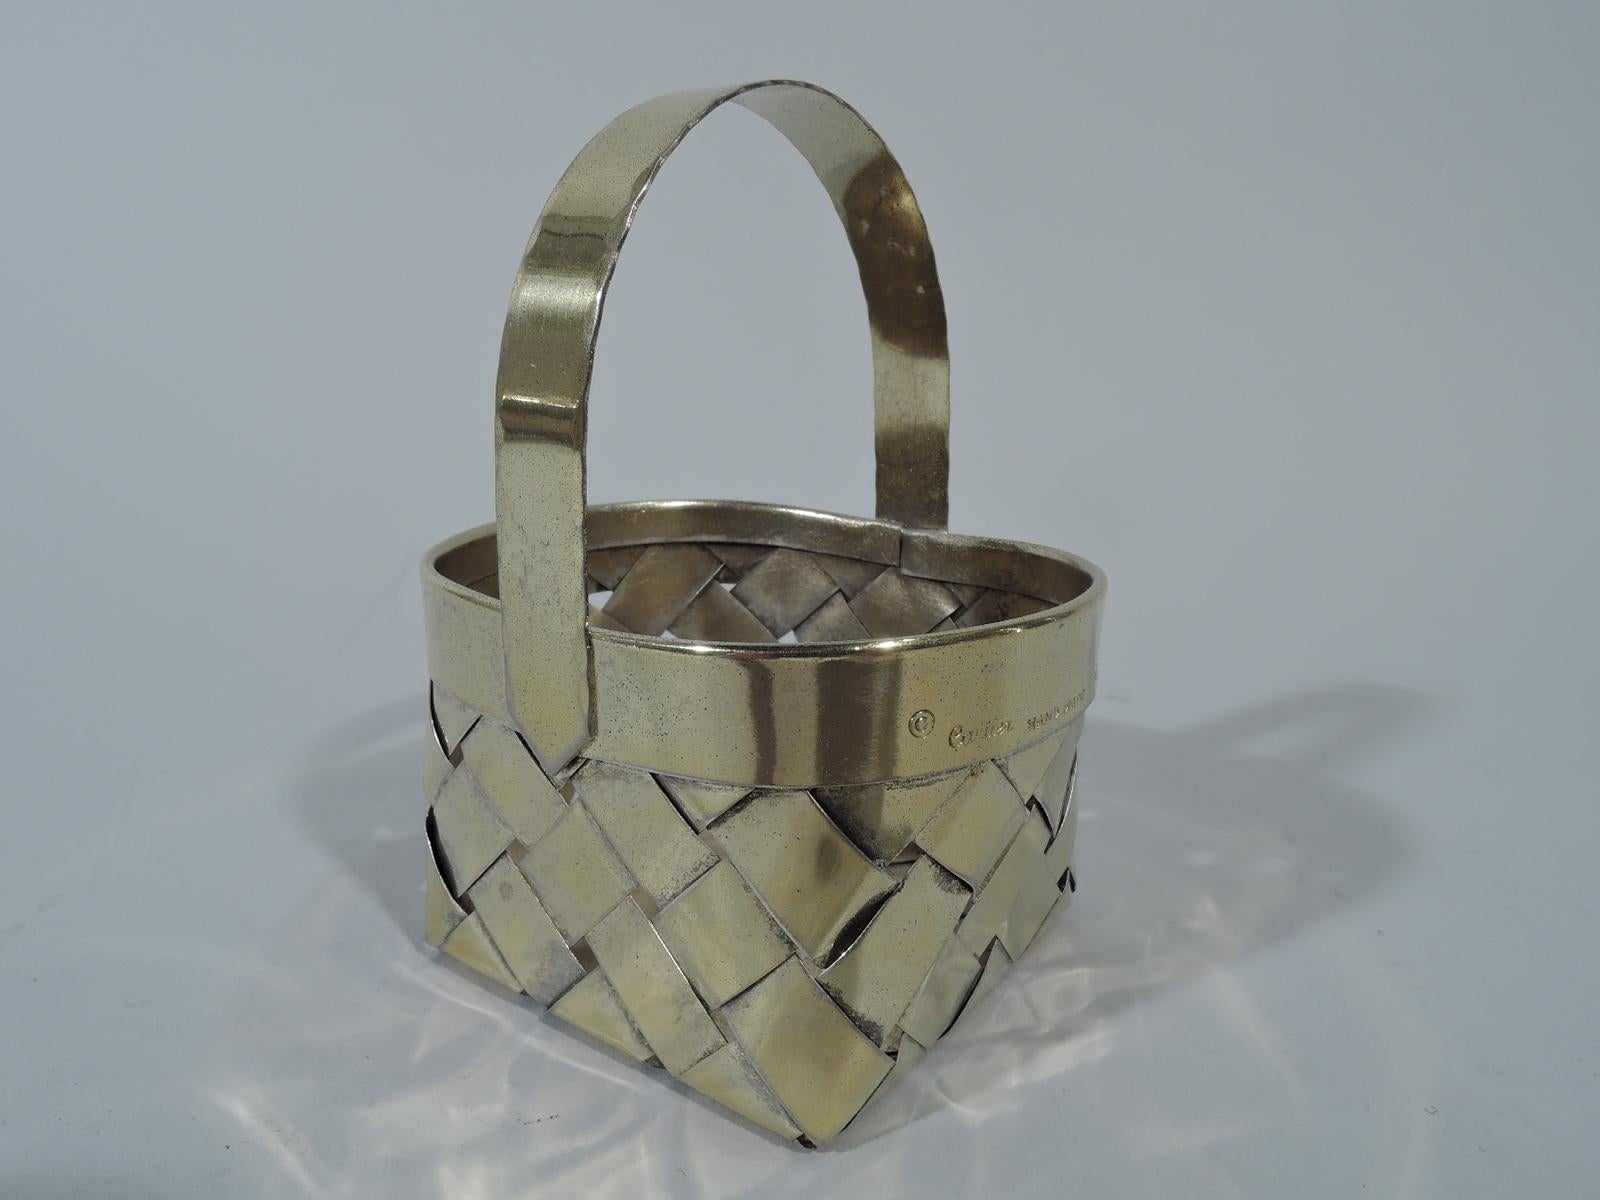 Mid-Century Modern sterling silver country chic basket. Retailed by Cartier in New York. Rectangular with curved ends. Plain rim and fixed C-scroll handle with “stitched” rims. Woven strips. The splurge-size version of the Classic high-low design